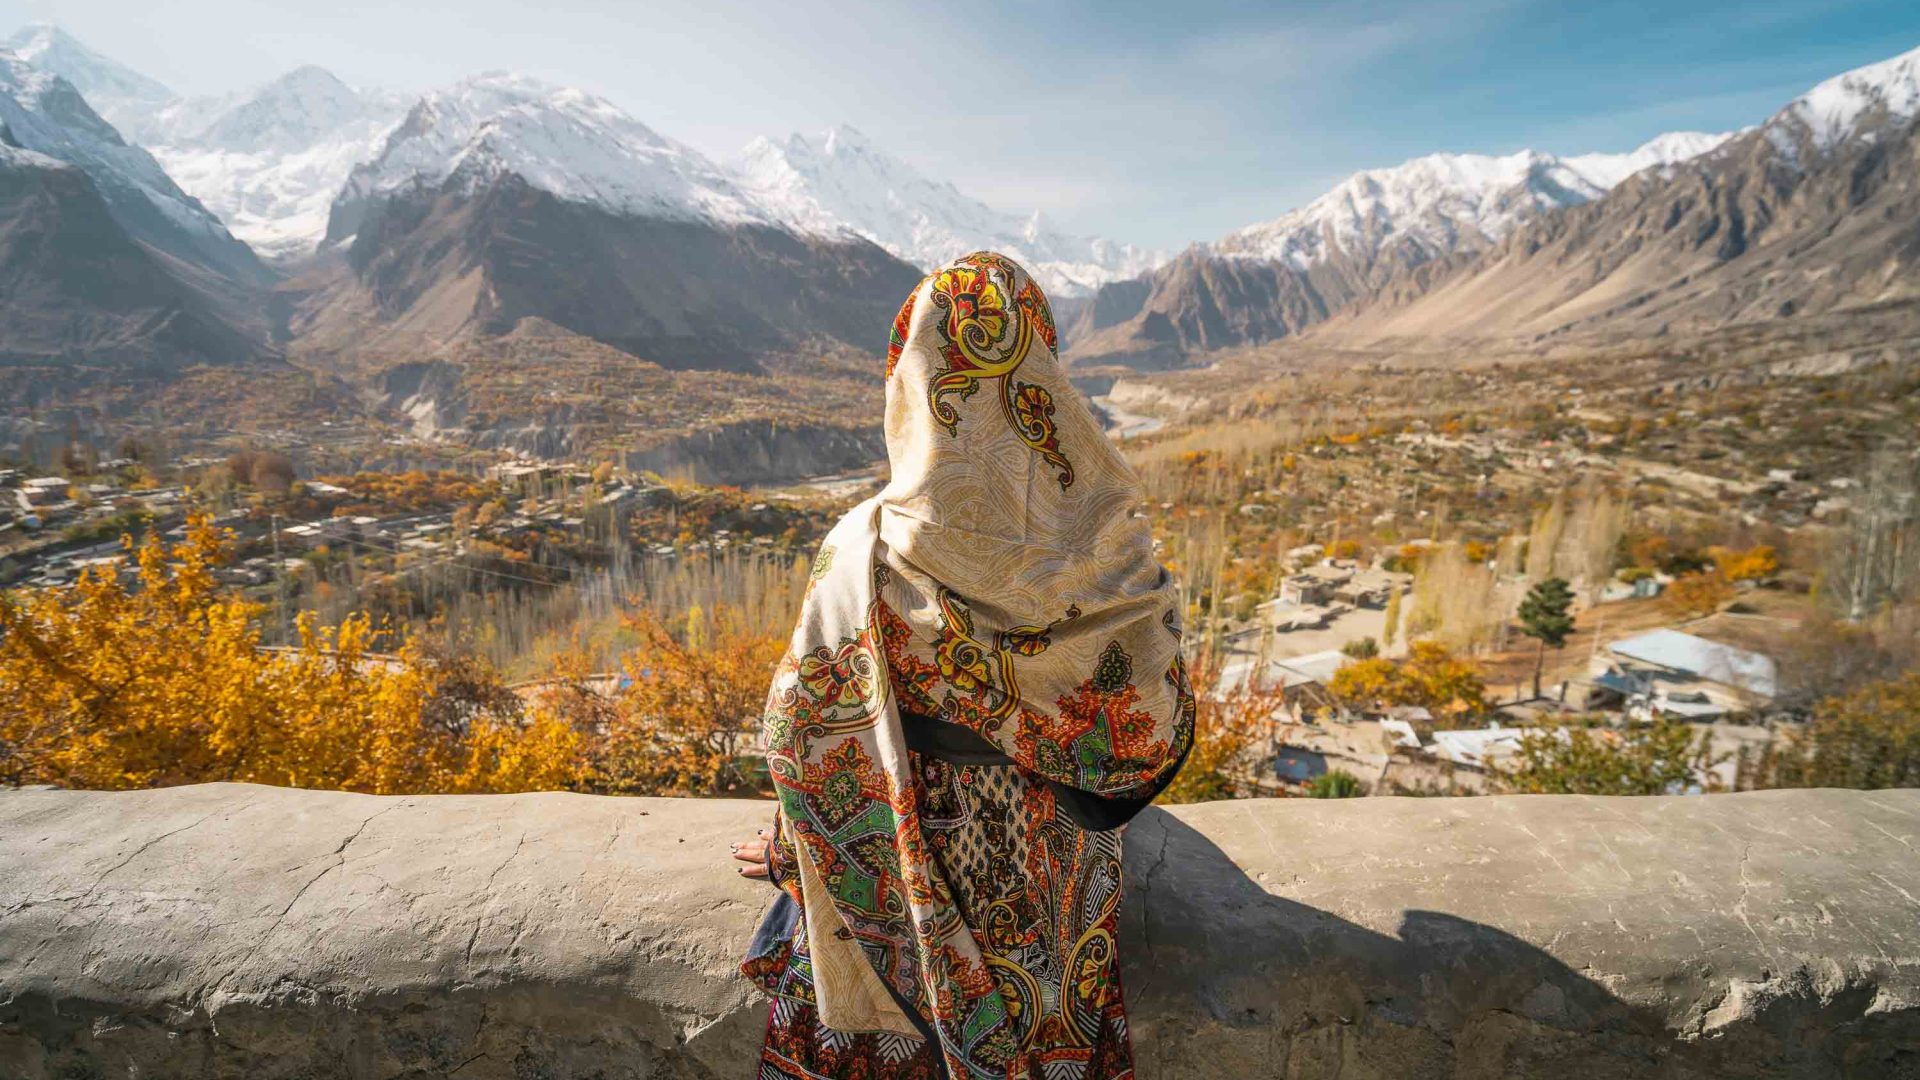 Meet Aneeqa, the tour leader forging new paths in Pakistan